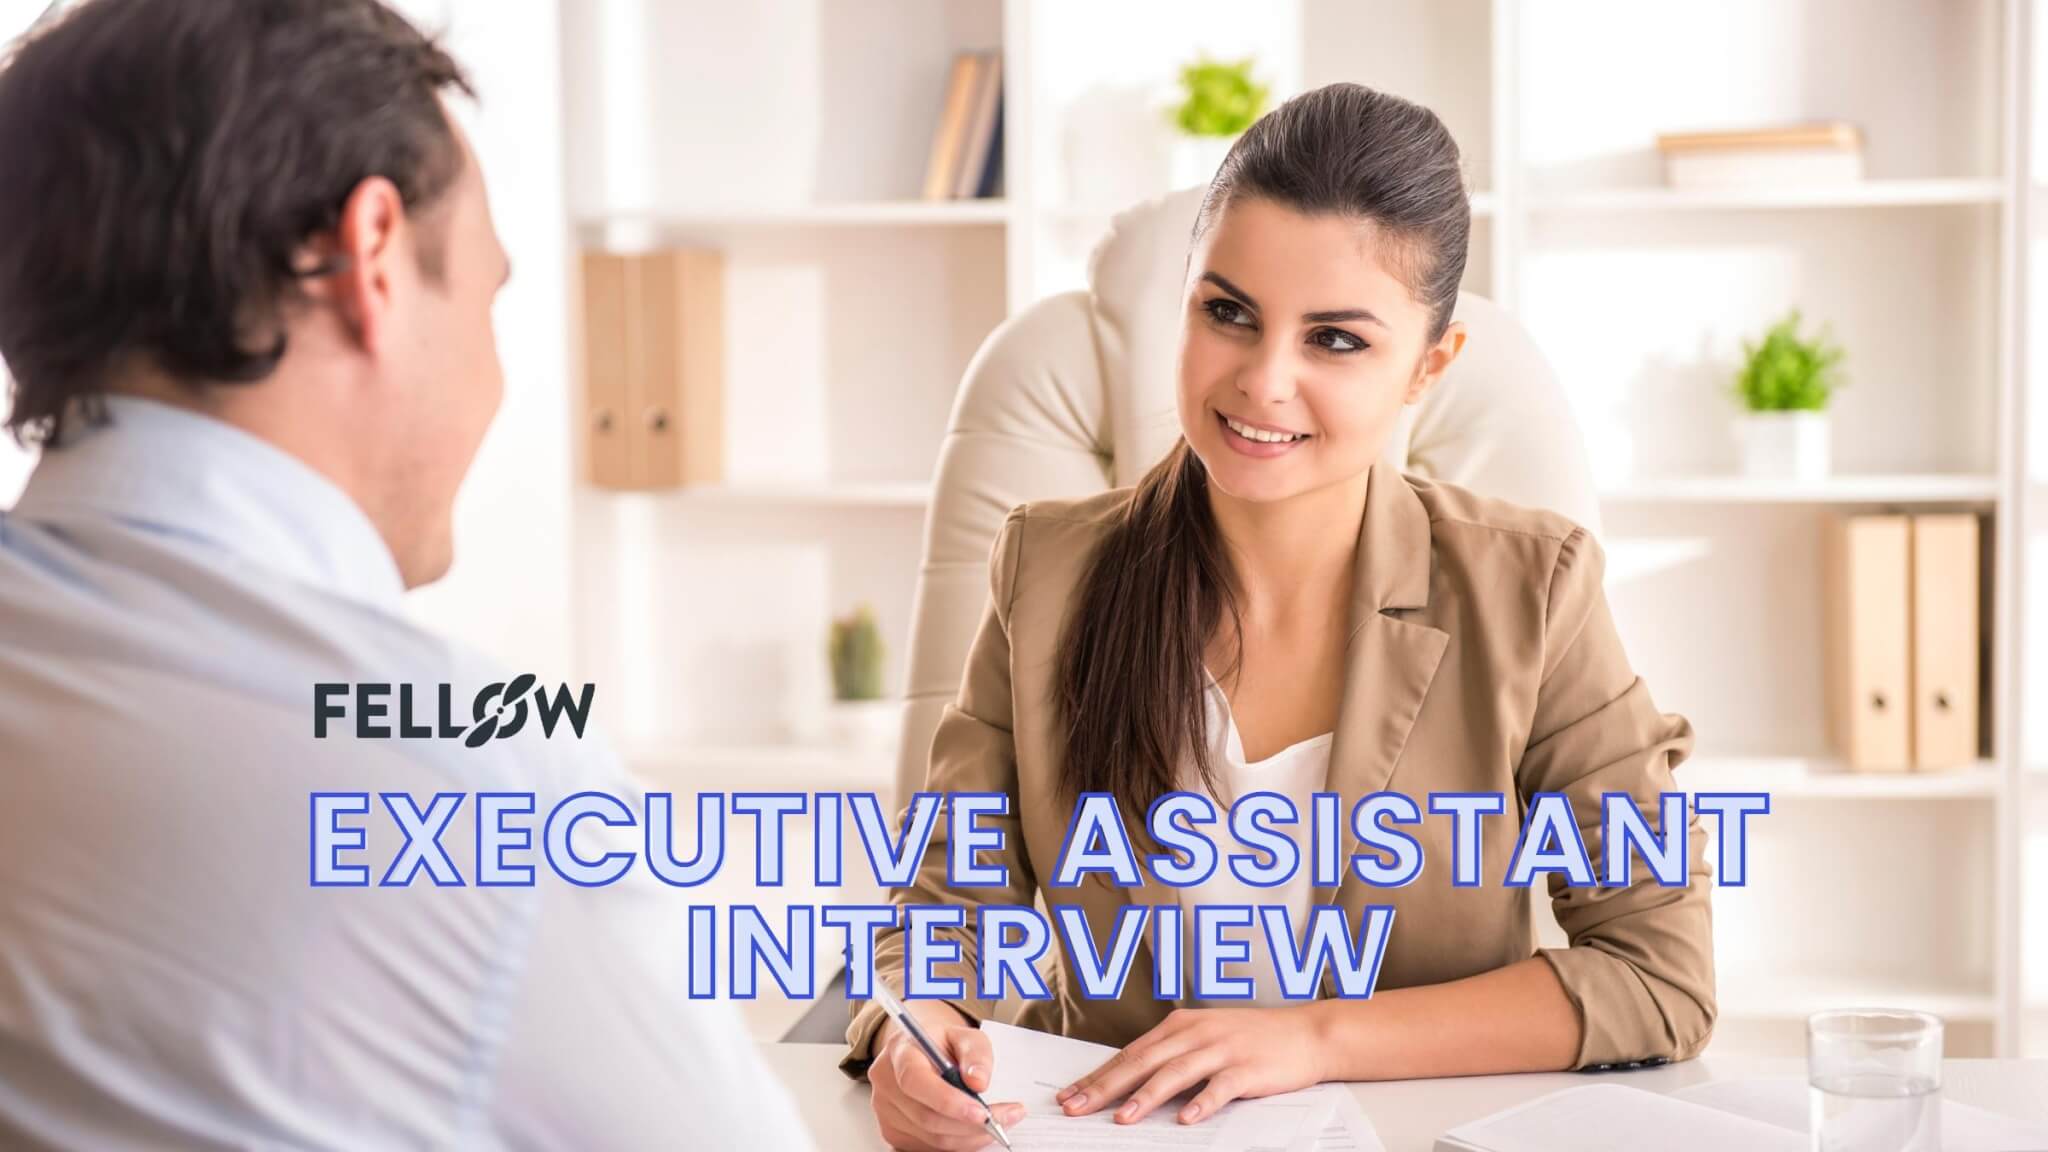 50 Executive Assistant Interview Questions (+ Sample Answers!)